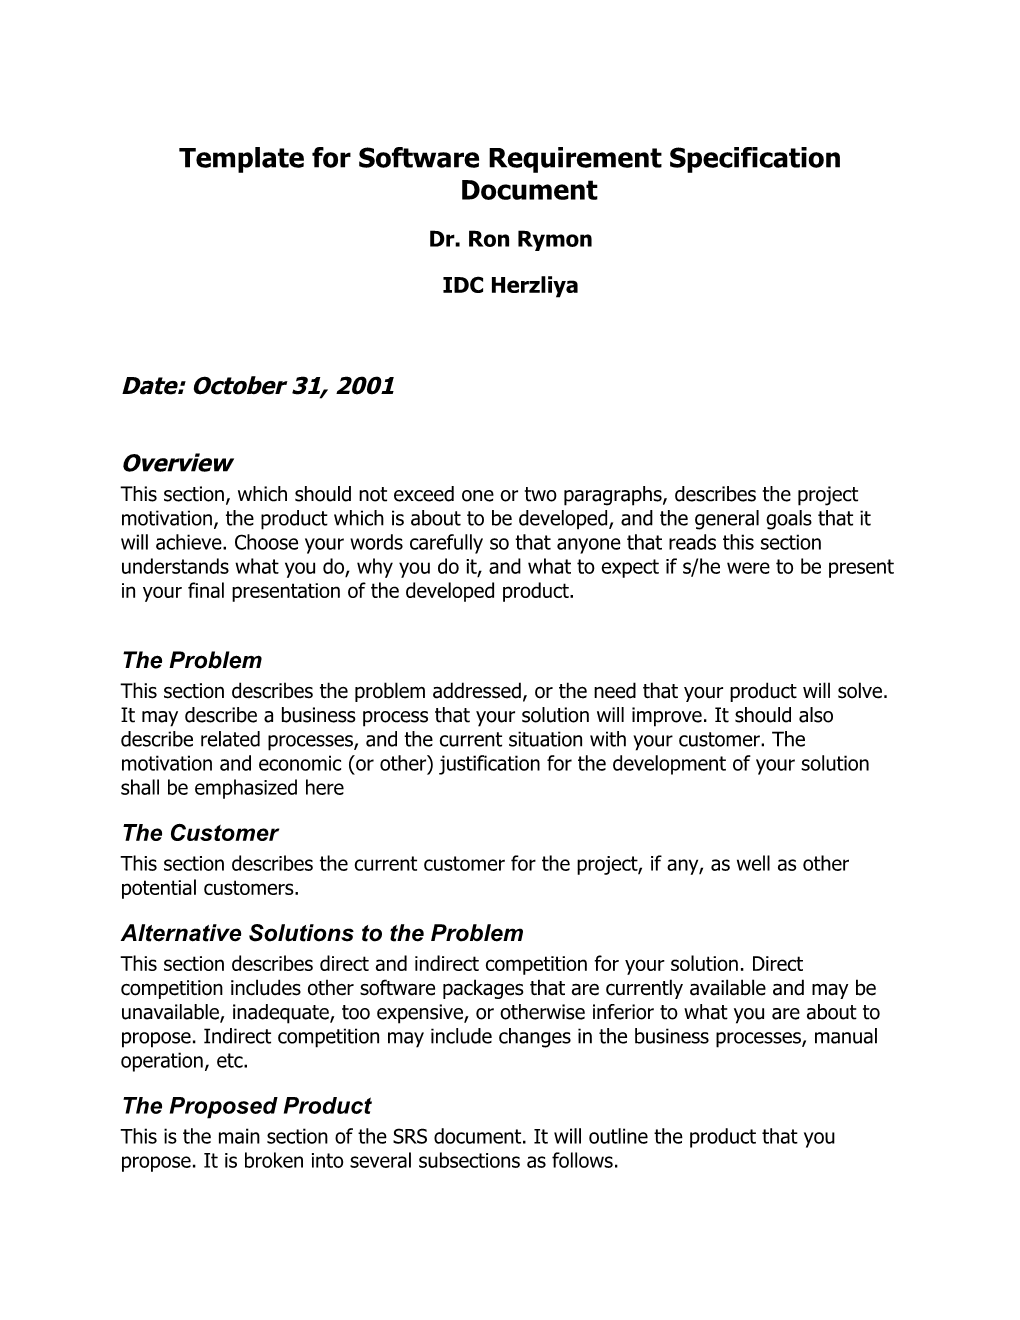 Template for Software Requirement Specification Document